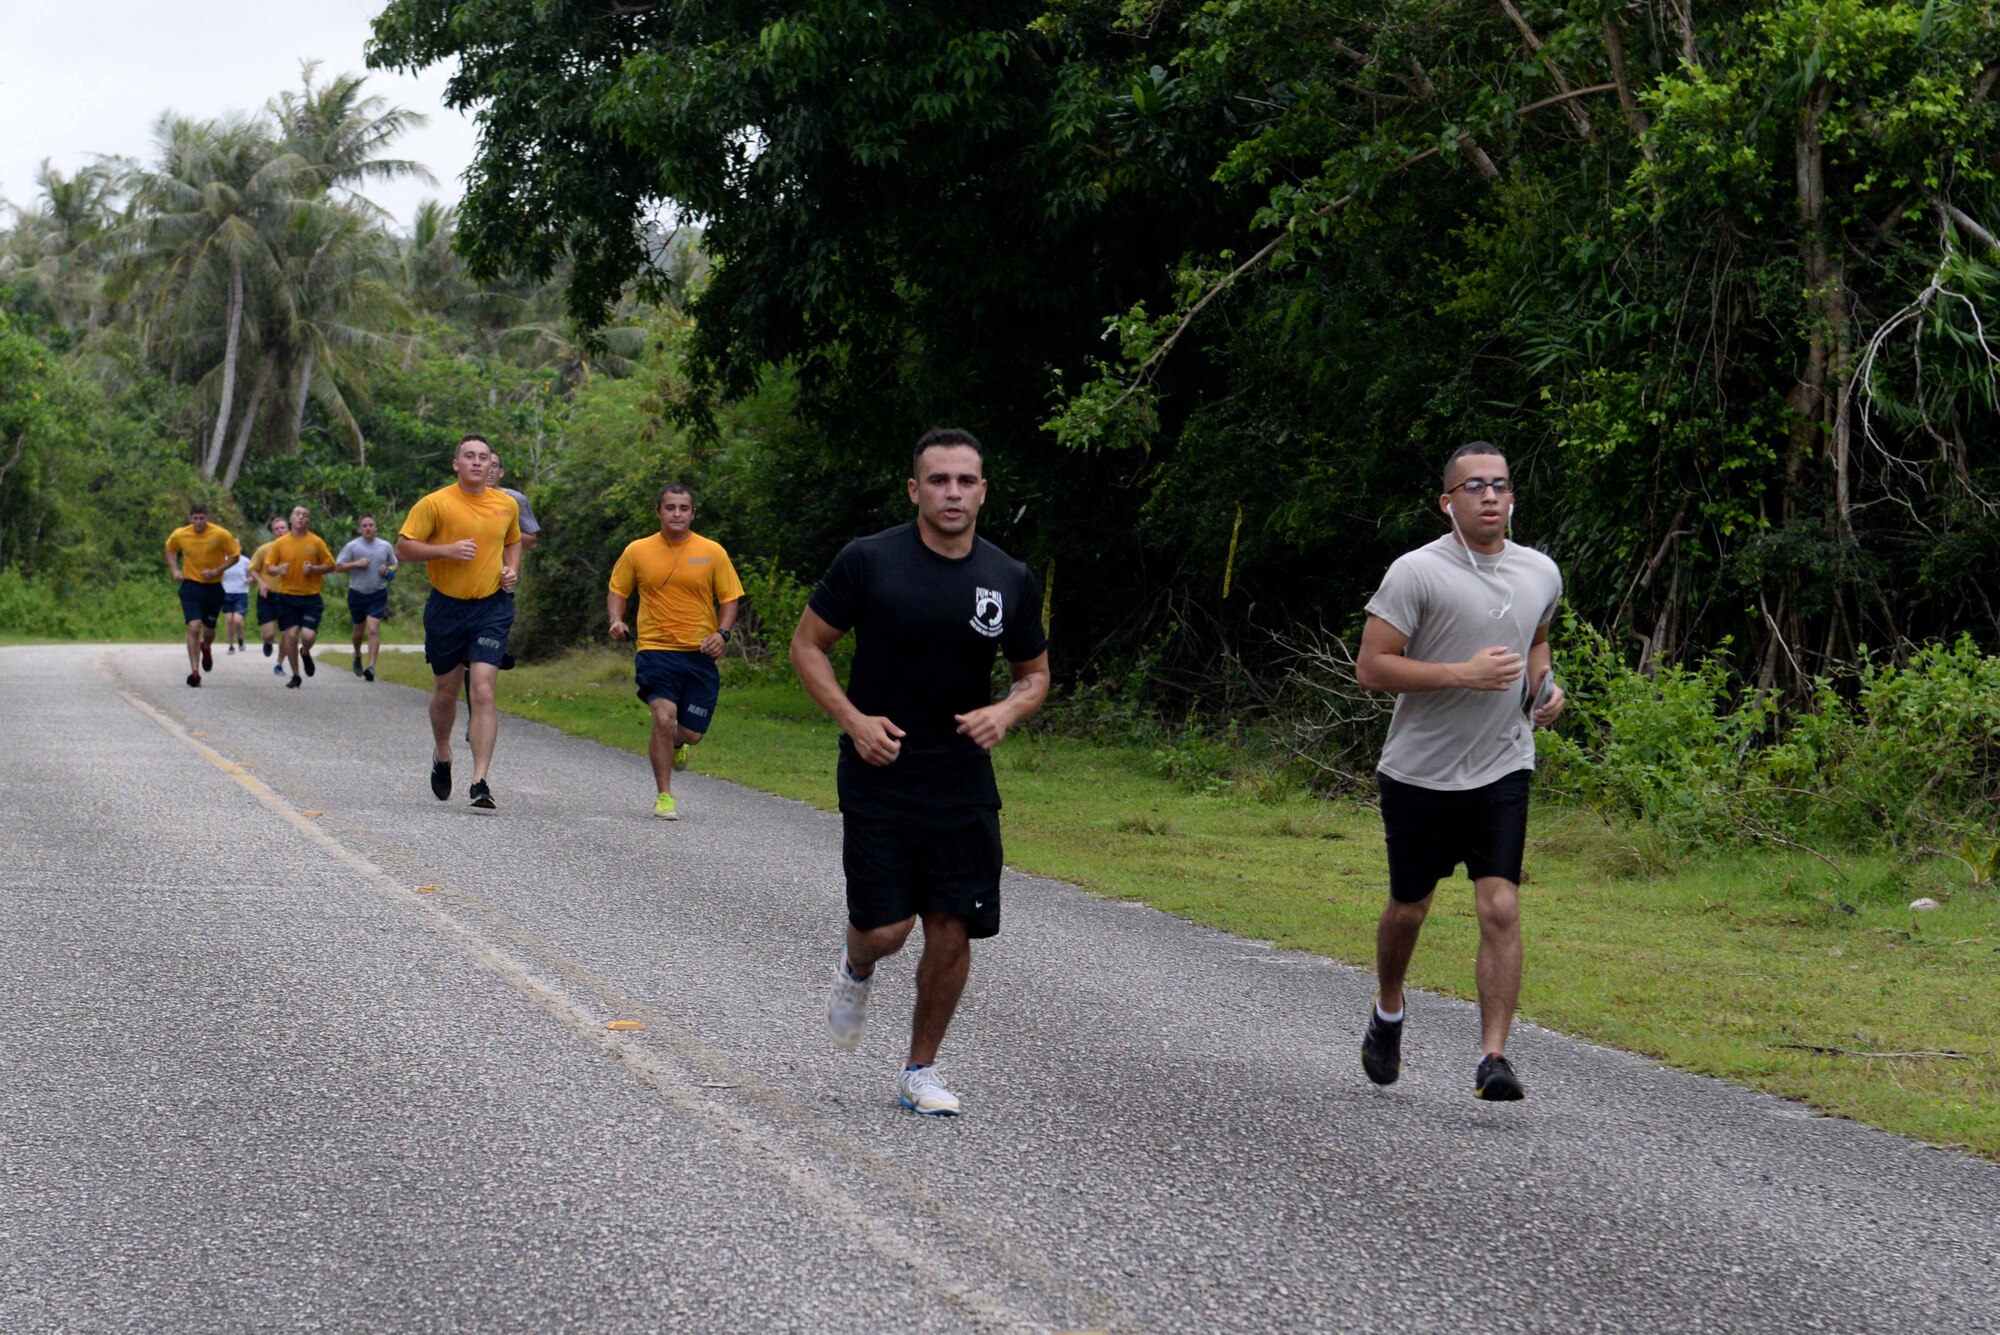 Service members and families run in the Turkey Trot 5K Nov. 18, 2015, at Andersen Air Force Base, Guam. More than 200 runners took to the road to celebrate Thanksgiving during the event sponsored by the 36th Force Support Squadron. (U.S. Air Force photo by Airman 1st Class Alexa Ann Henderson/Released) 